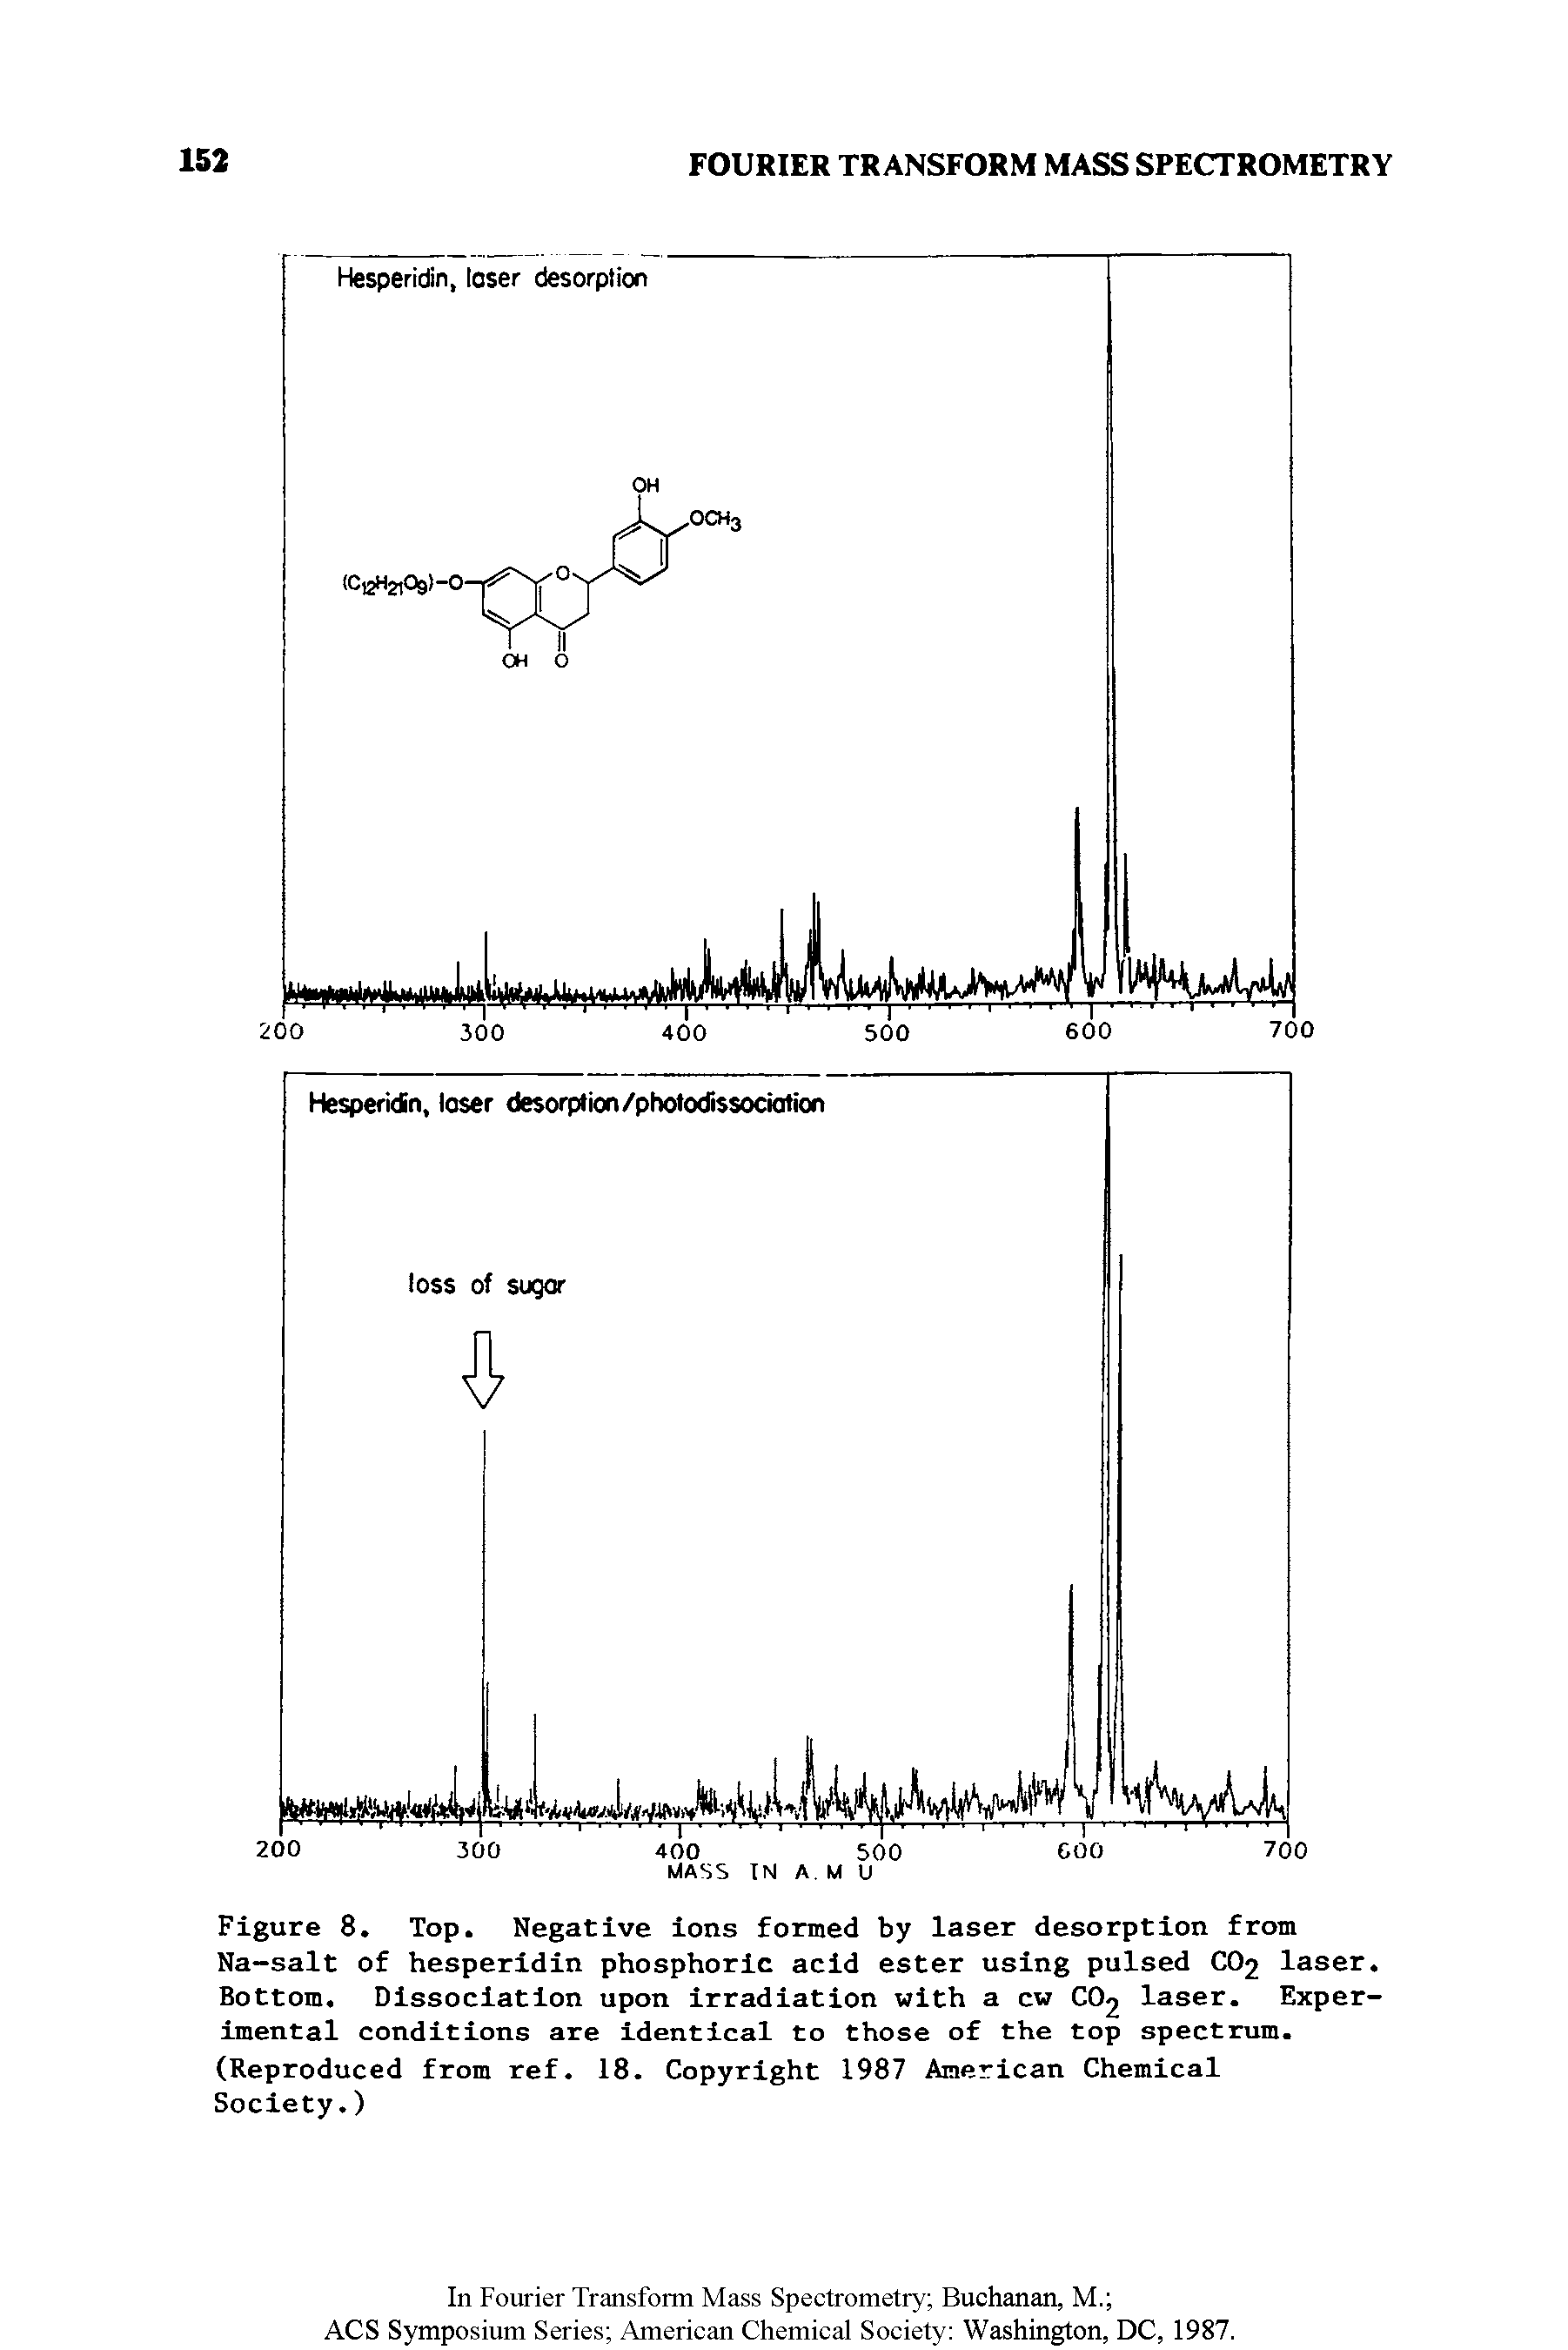 Figure 8. Top. Negative ions formed by laser desorption from Na-salt of hesperidin phosphoric acid ester using pulsed CO2 laser. Bottom. Dissociation upon irradiation with a cw CO2 laser. Experimental conditions are identical to those of the top spectrum. (Reproduced from ref. 18. Copyright 1987 American Chemical Society.)...